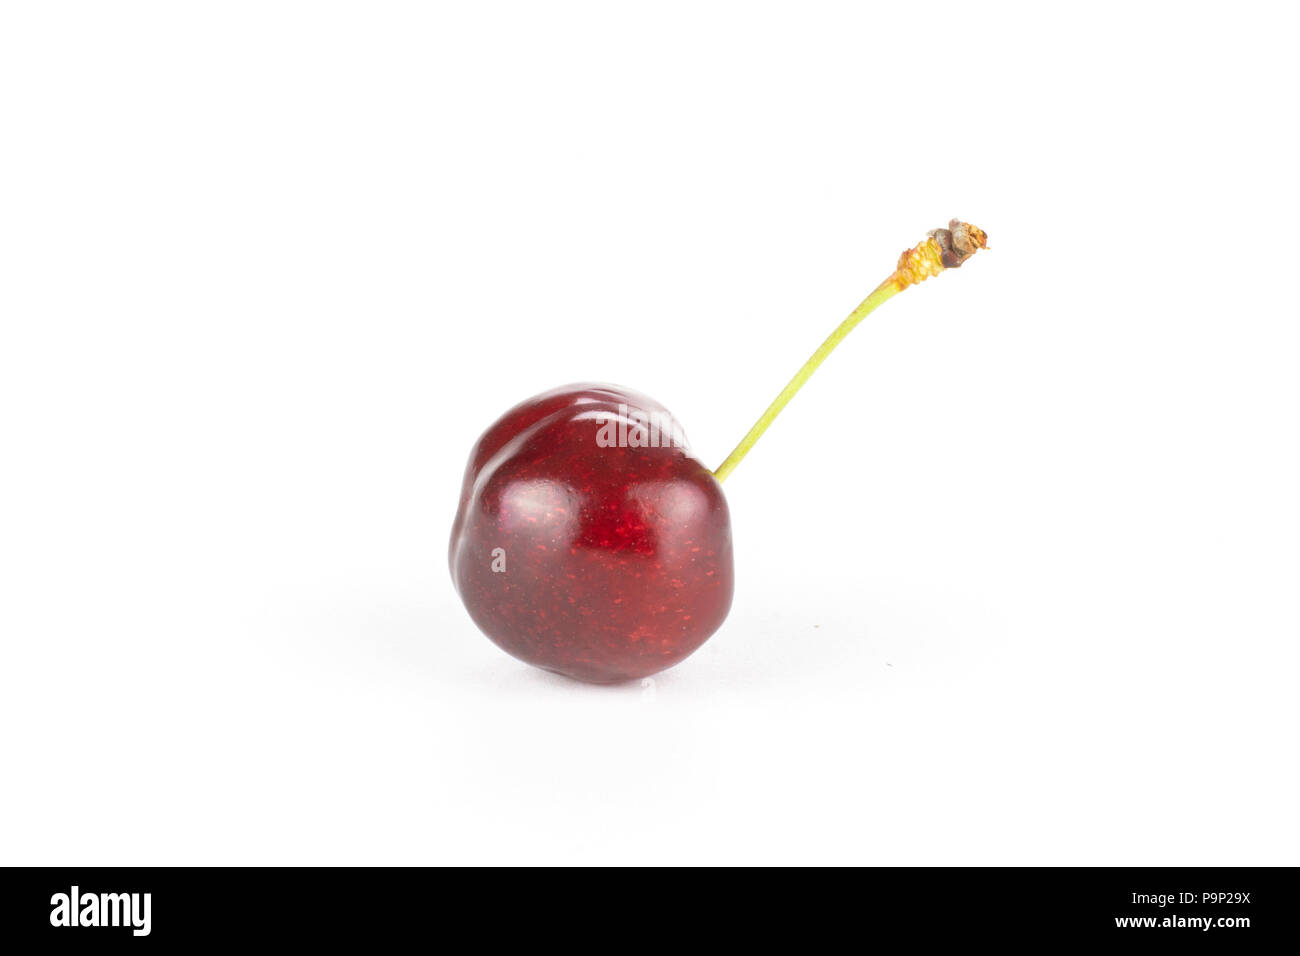 One whole sweet bright red cherry with a stem side look isolated on white Stock Photo